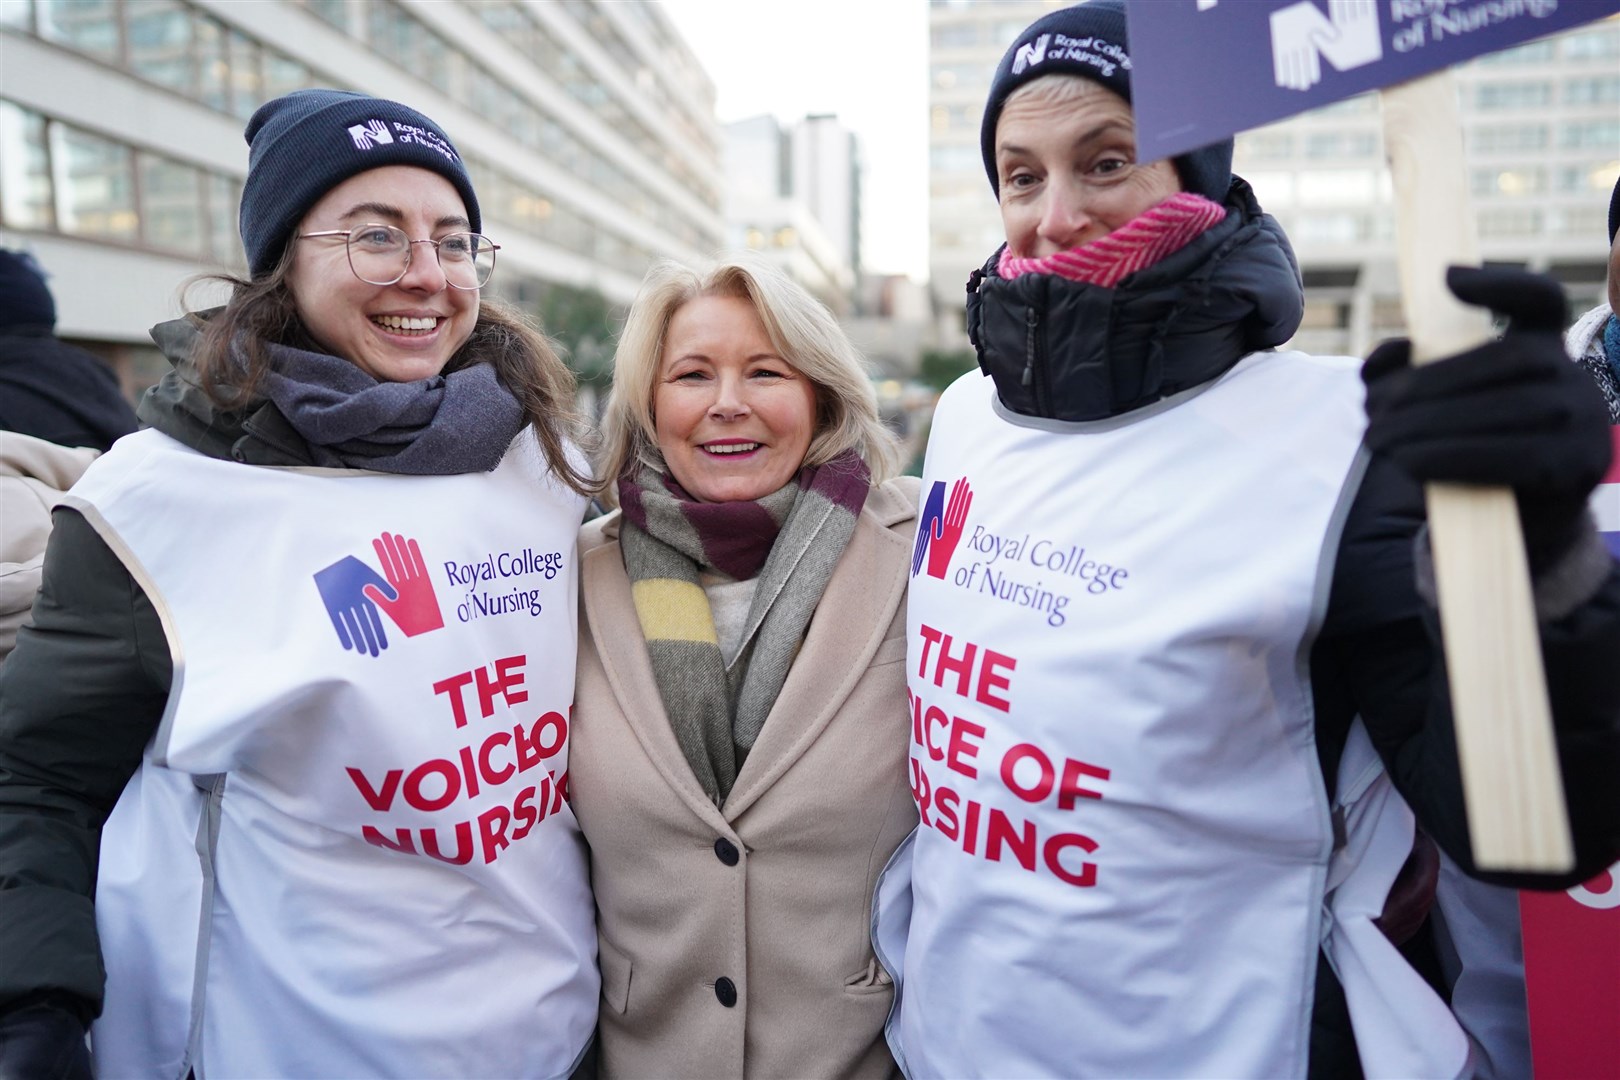 RCN general secretary Pat Cullen (centre) with members of the Royal College of Nursing (Stefan Rousseau/PA)